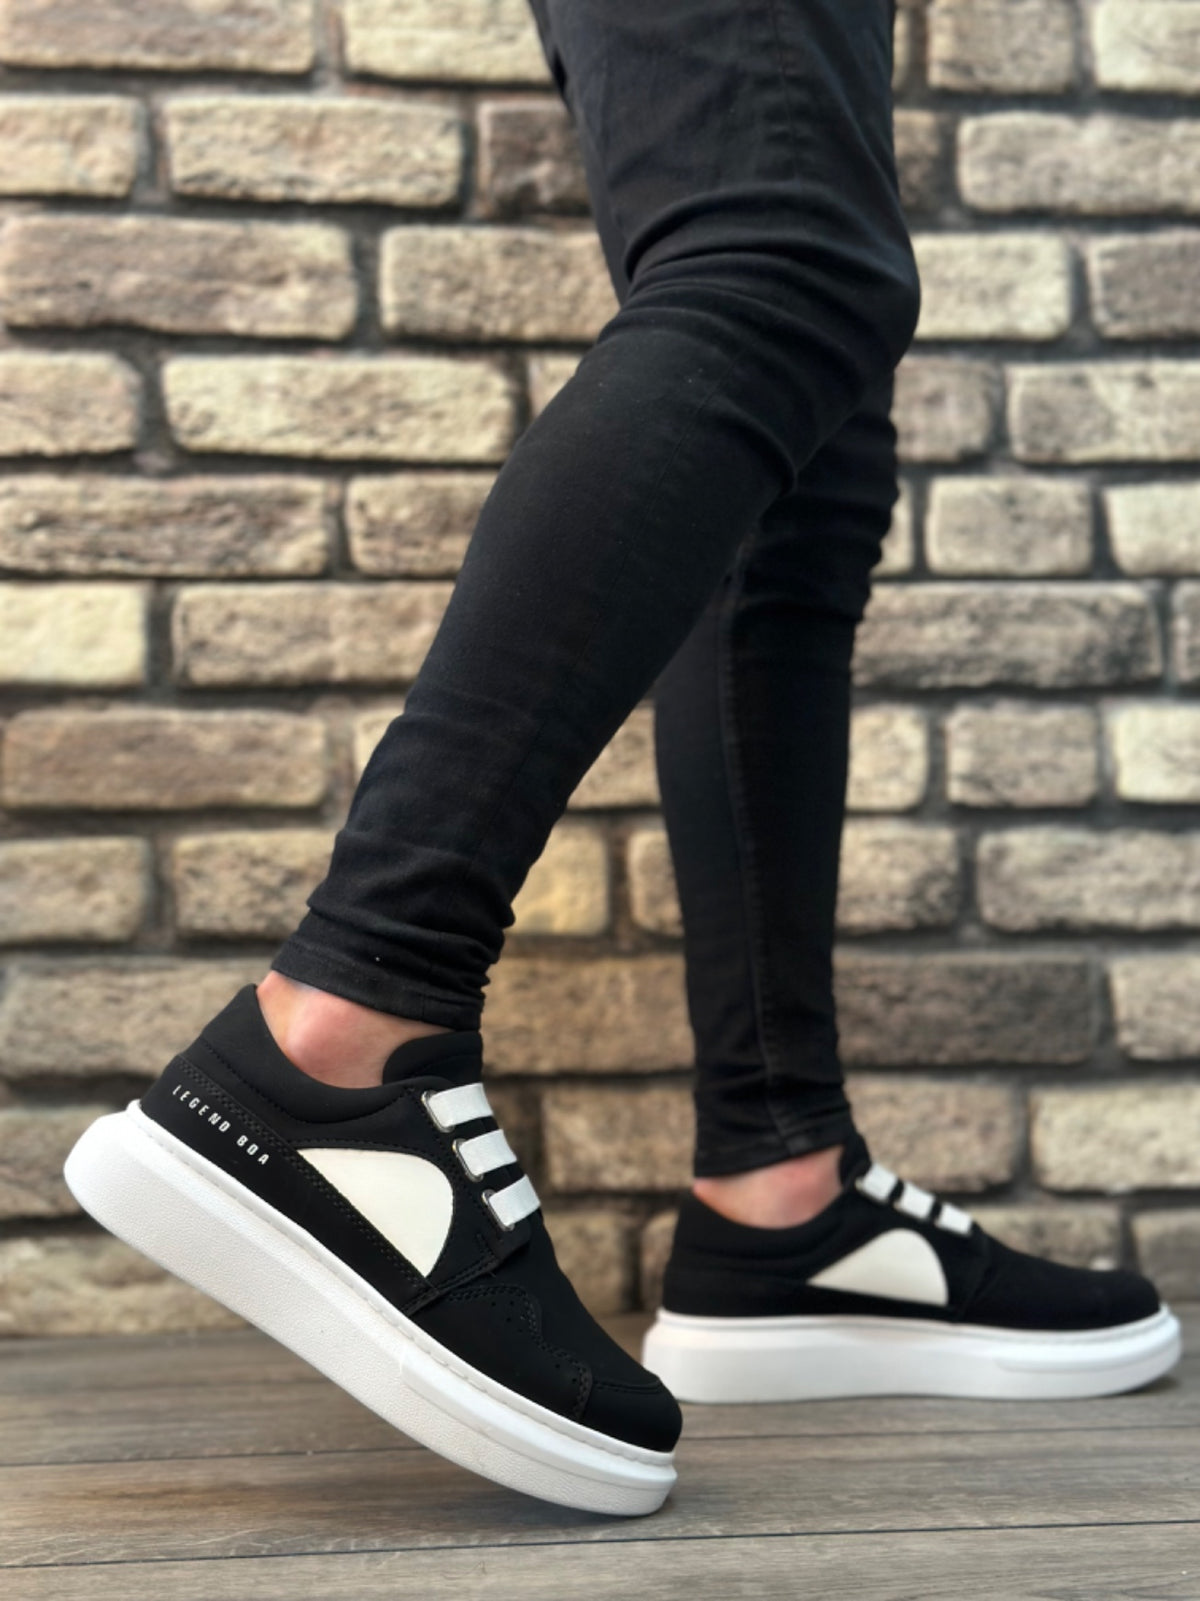 BA0302 Thick Sole Lace-Up Style Casual Black White Men's Sneakers Shoes - STREET MODE ™